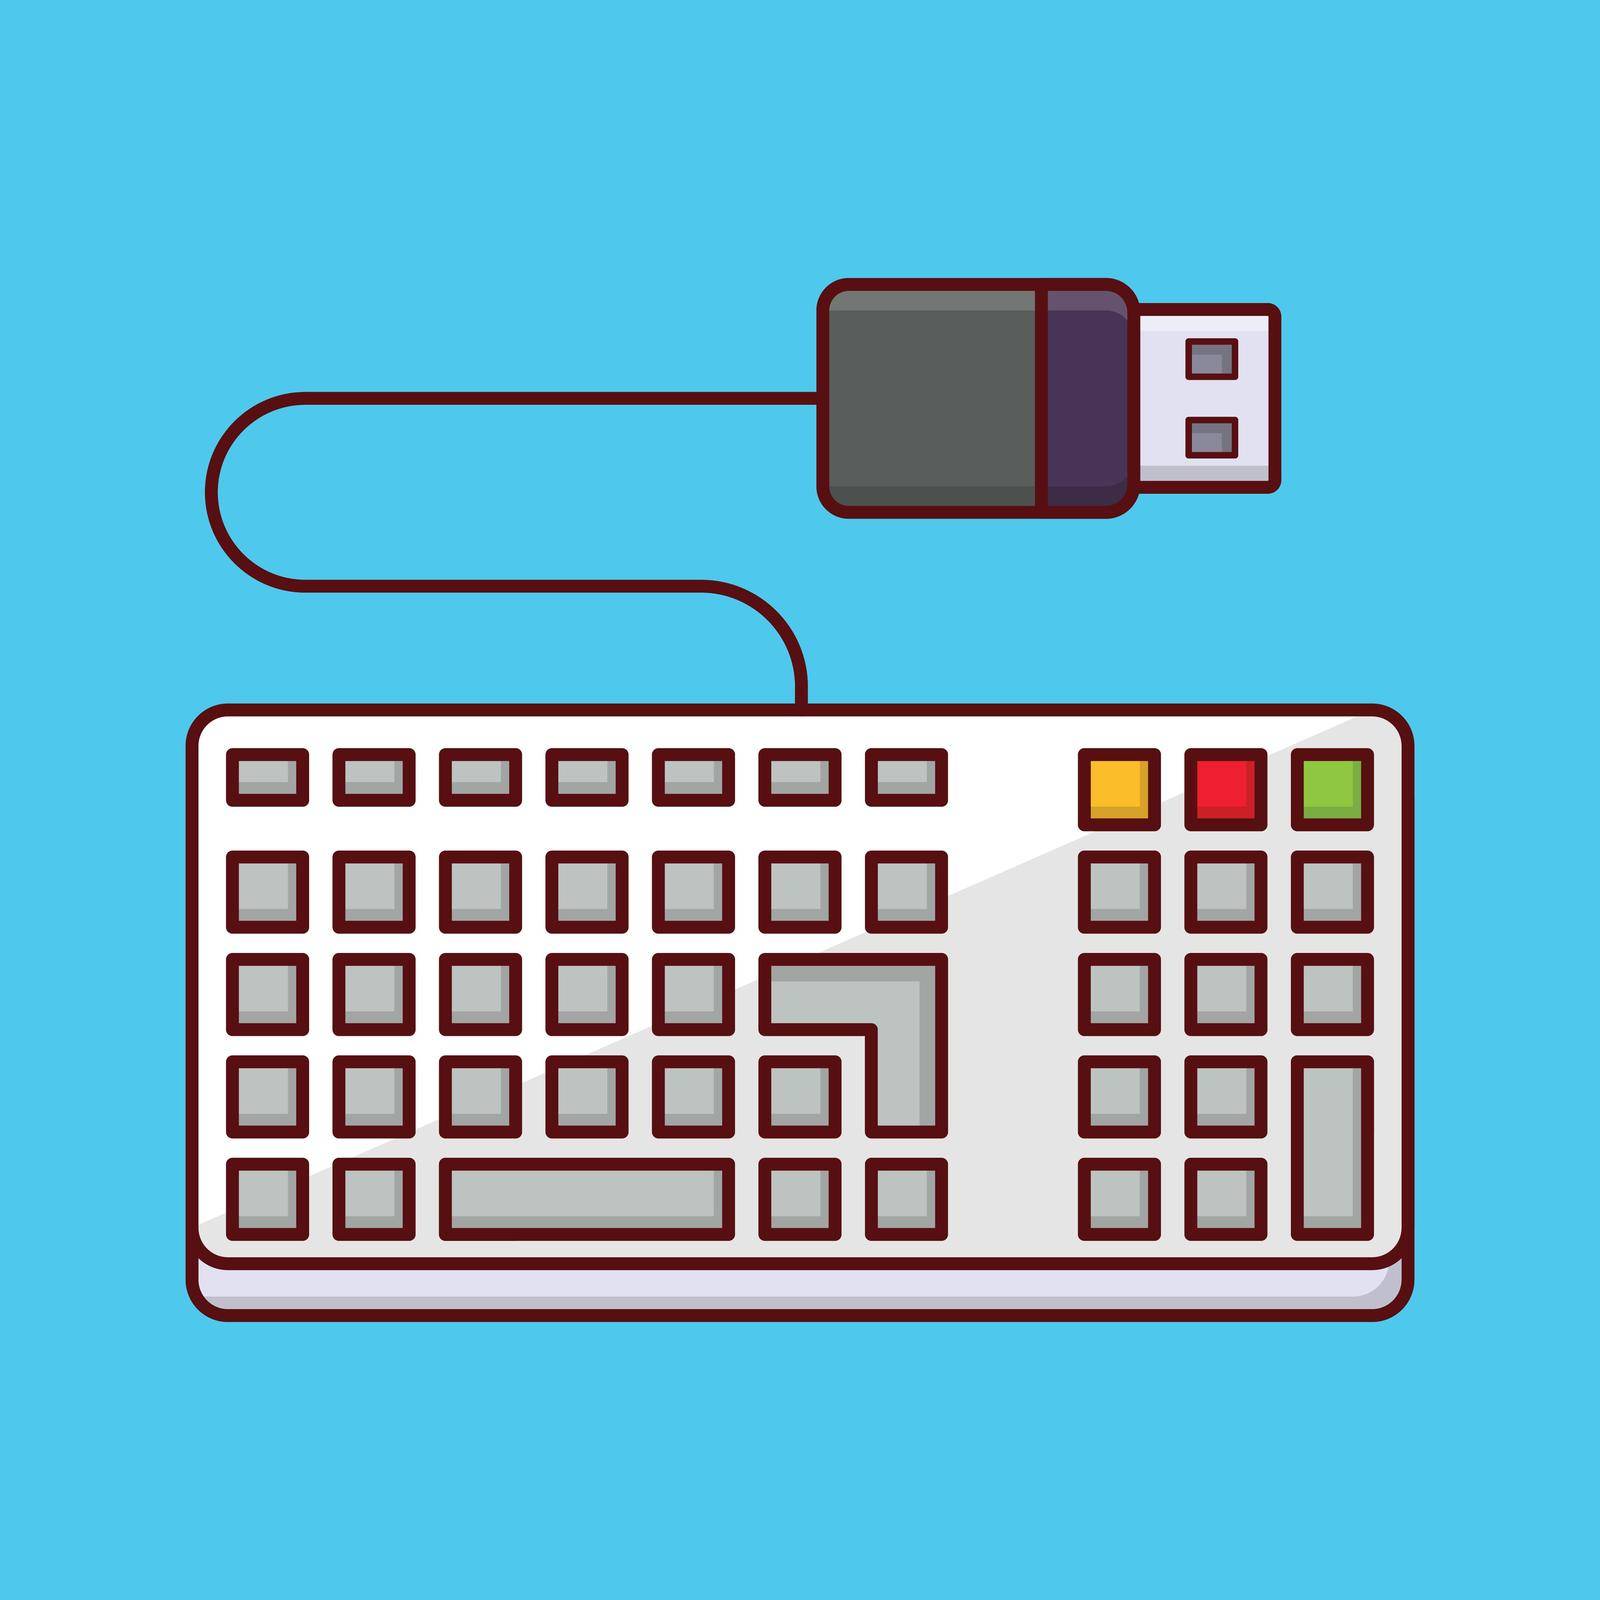 keyboard Vector illustration on a transparent background. Premium quality symmbols. Vector line flat icons for concept and graphic design.